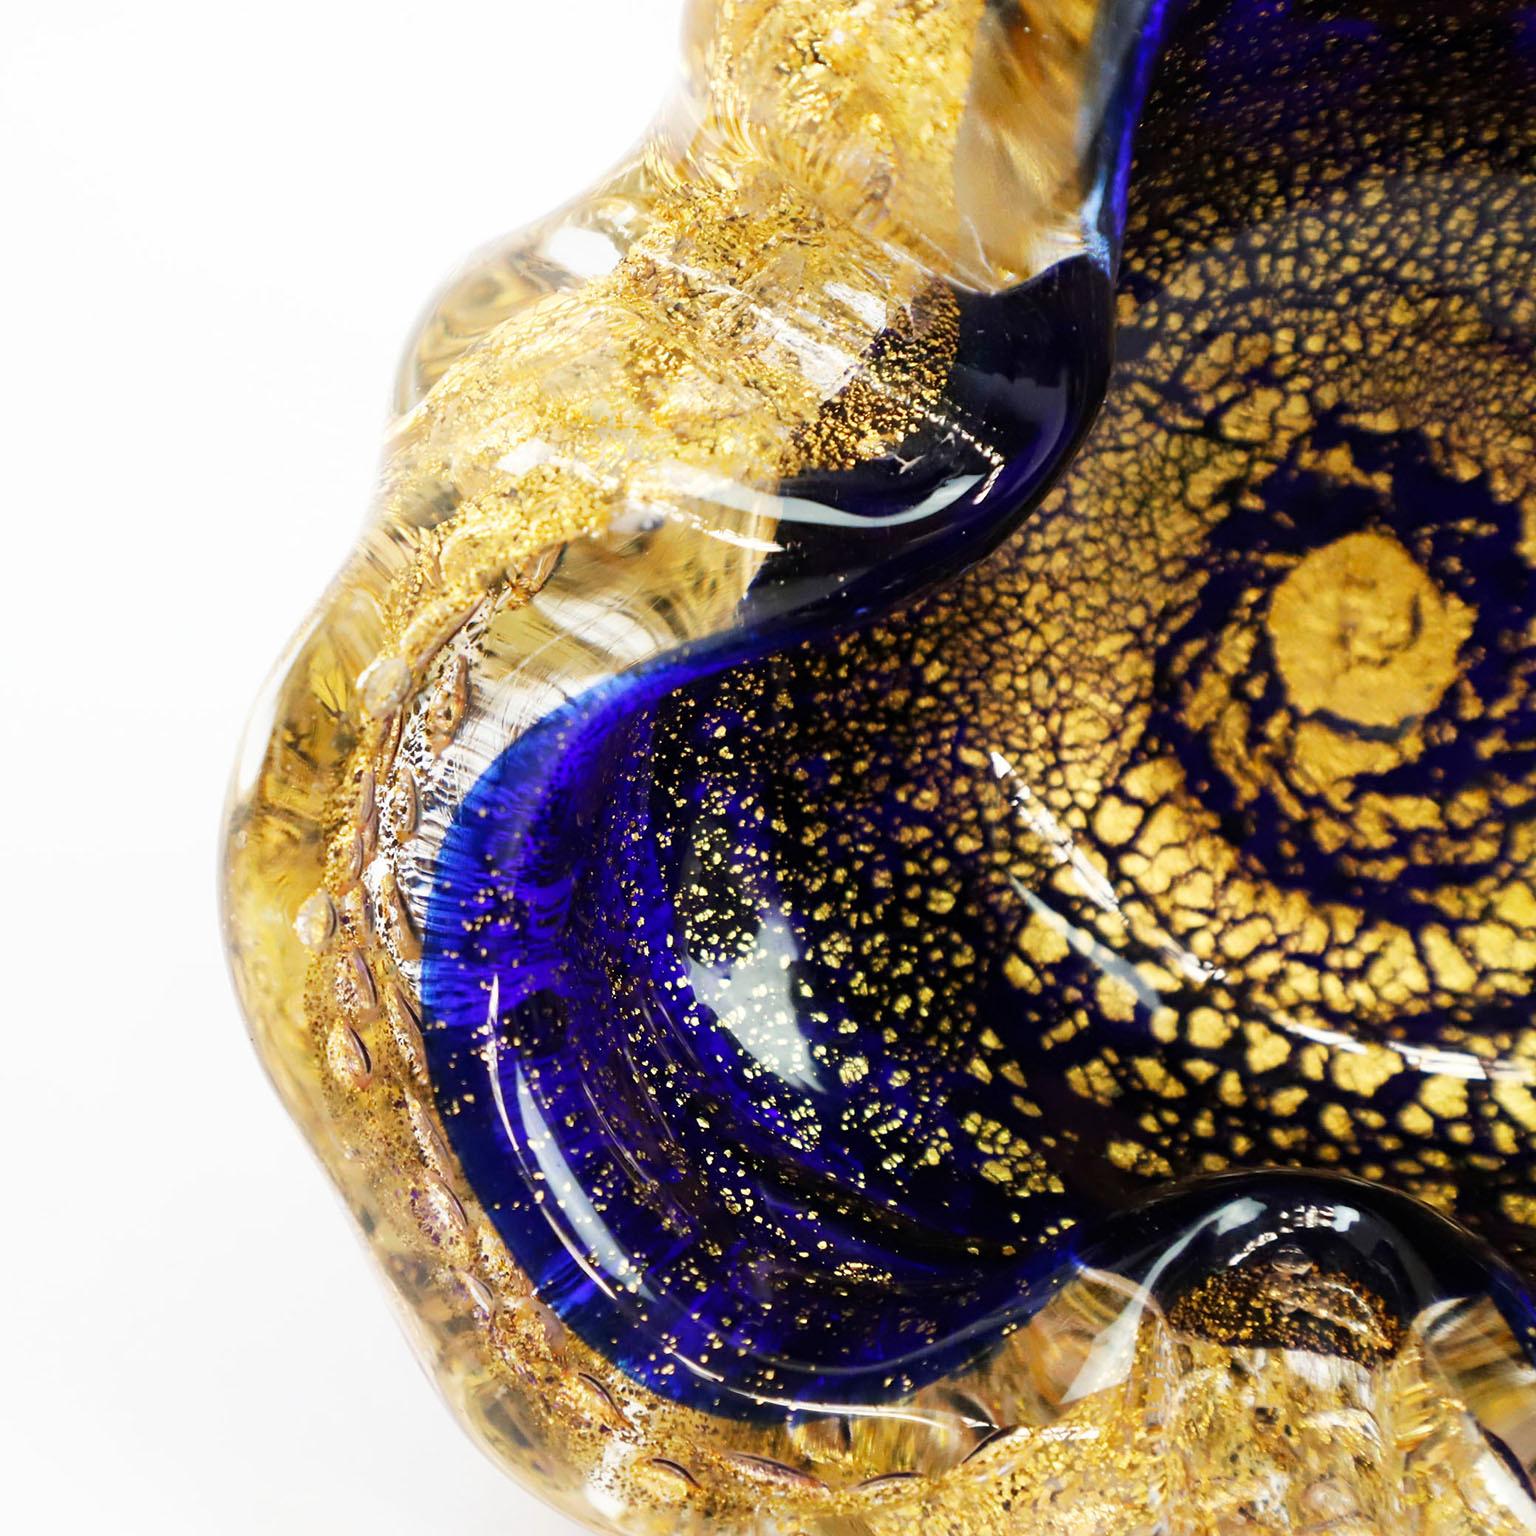 Cira 1970, made in Italy. We offer this beautiful Murano Glass with Pestle 